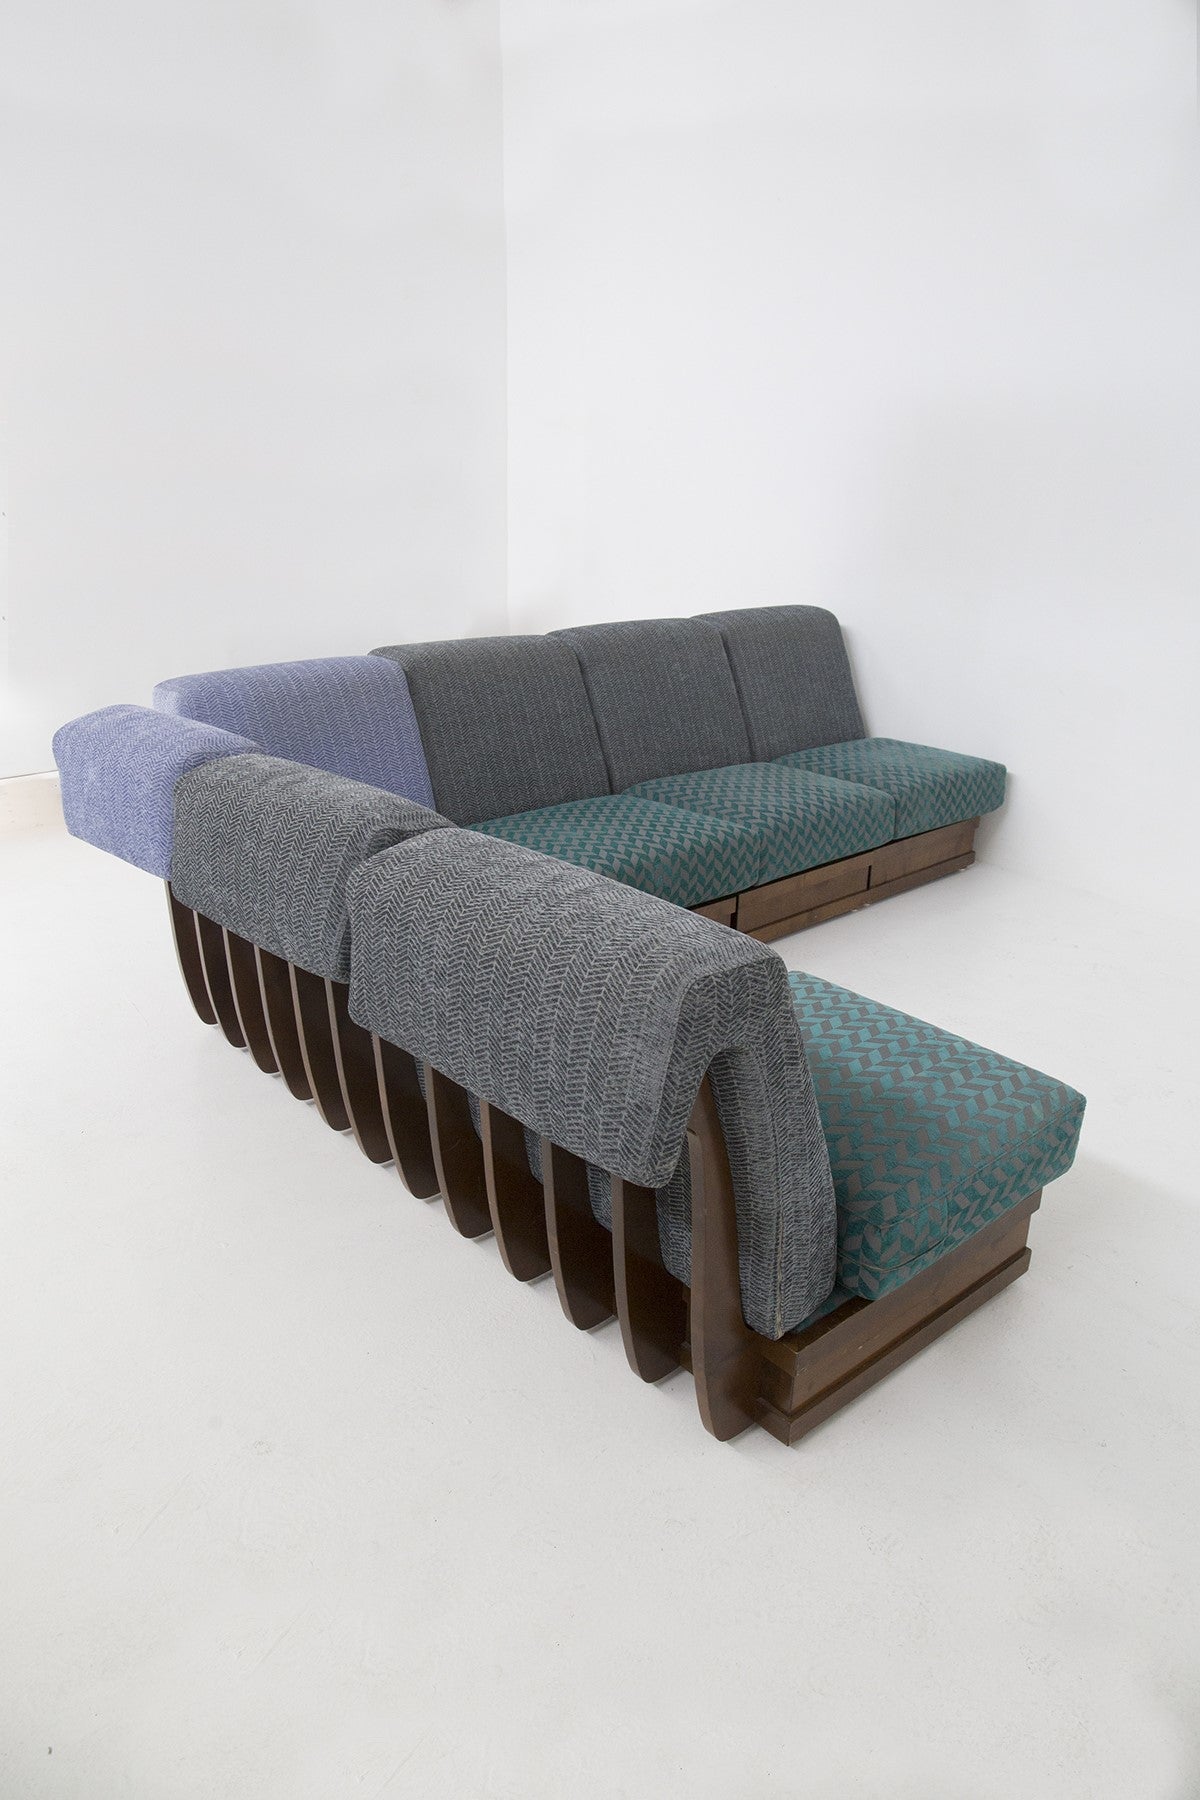 Modular sofa of wood and fabric by Luciano Frigerio, 1970s